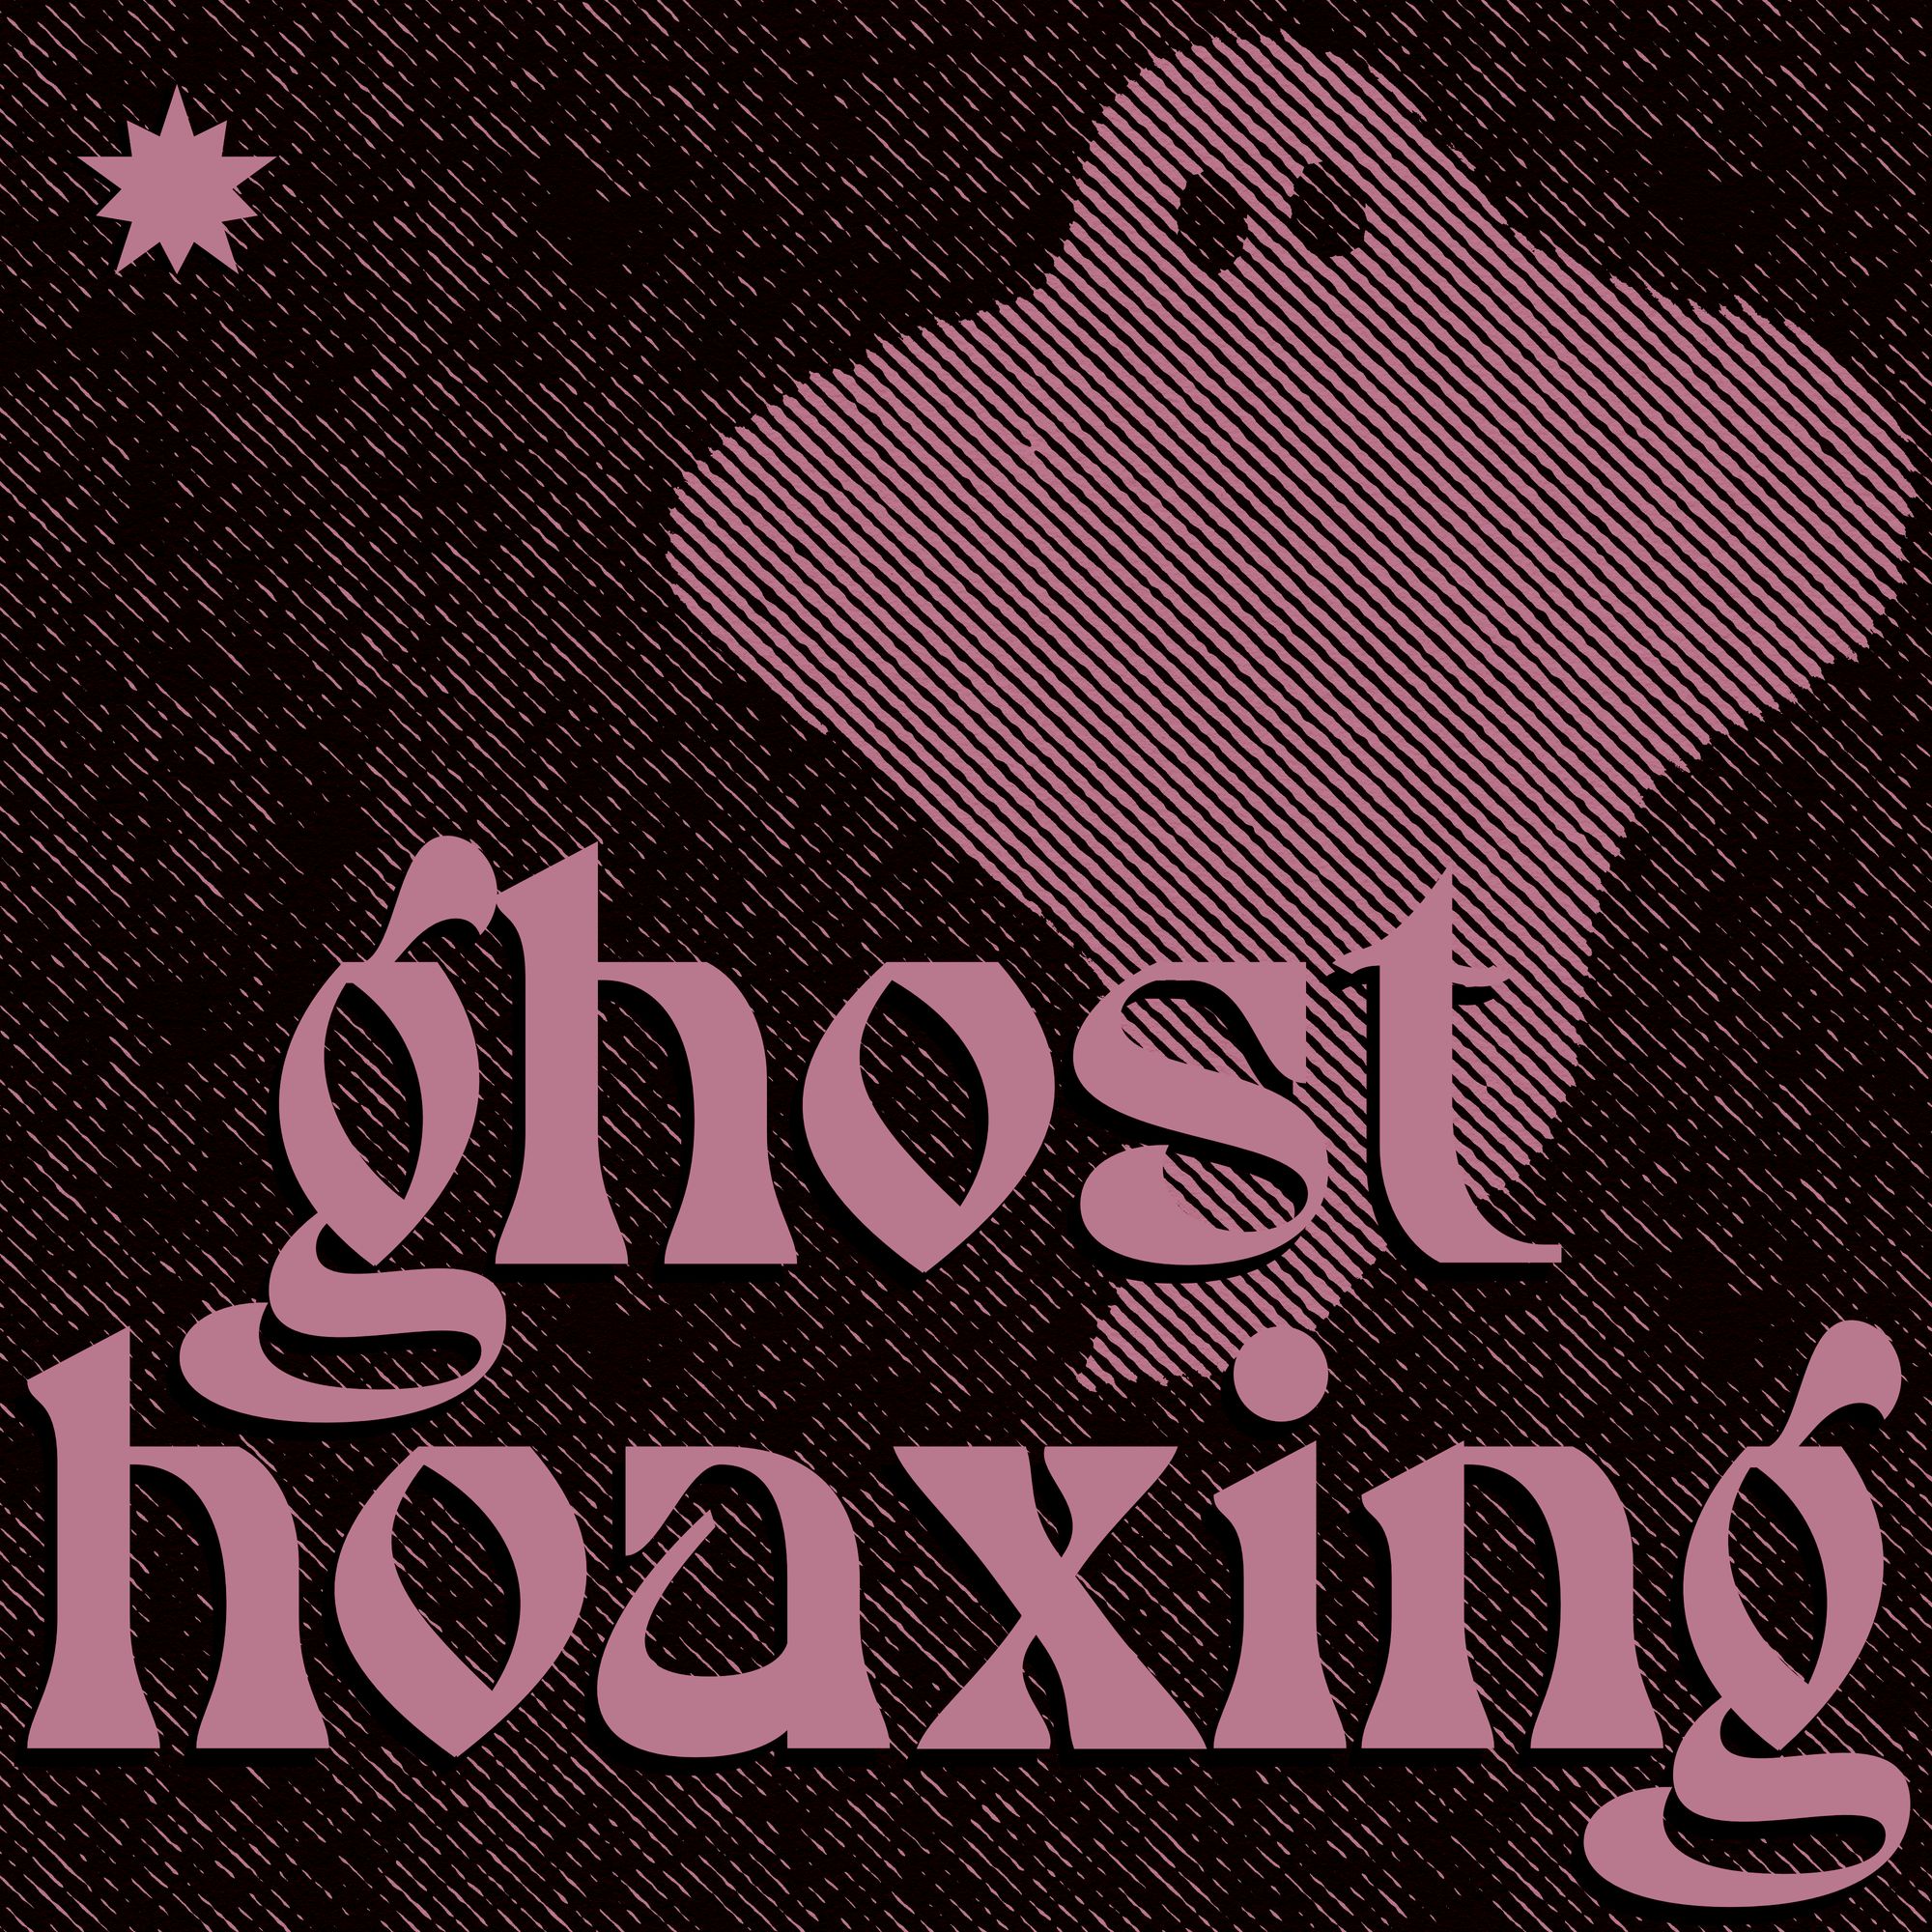 a halftone line drawing of a ghost with the words "ghost hoaxing"